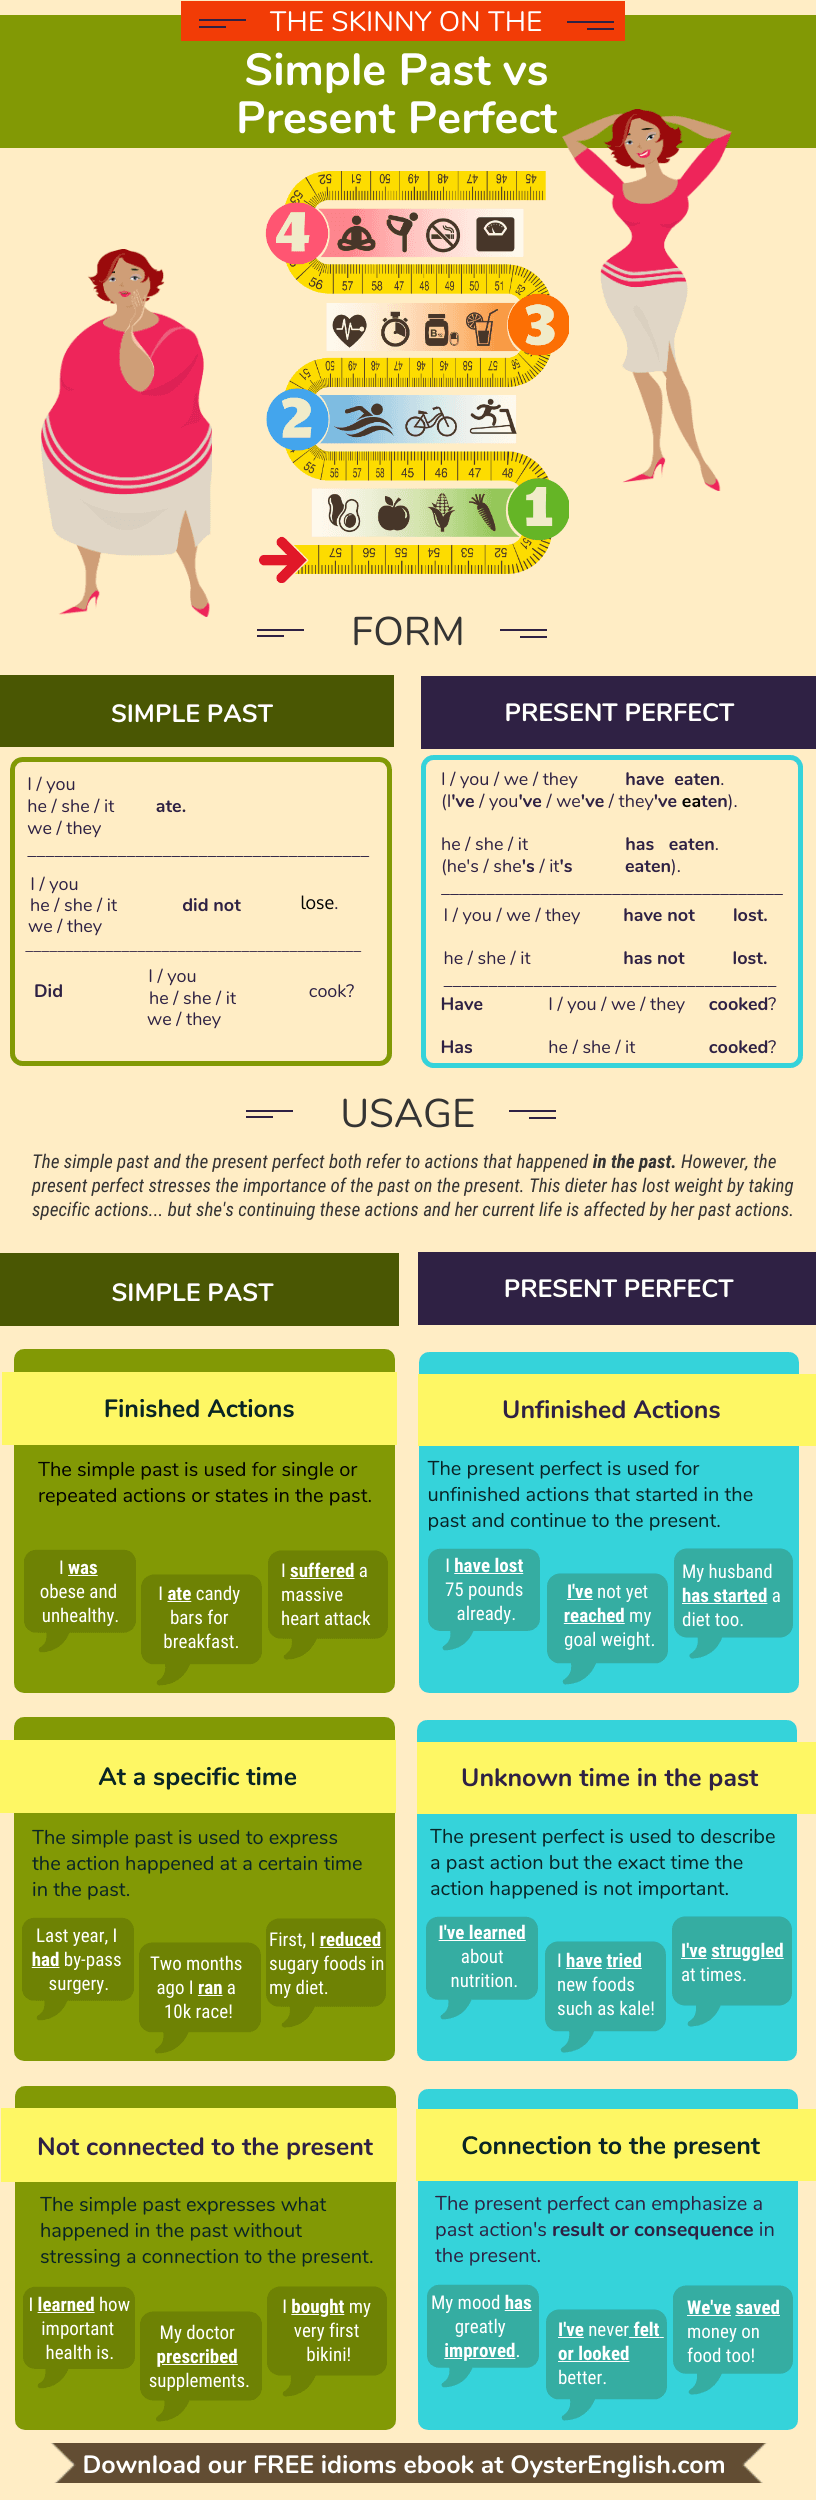 Infographic showing the differences in the form and usage of the simple past and present perfect tenses in English in the context of a woman's weight loss journey.